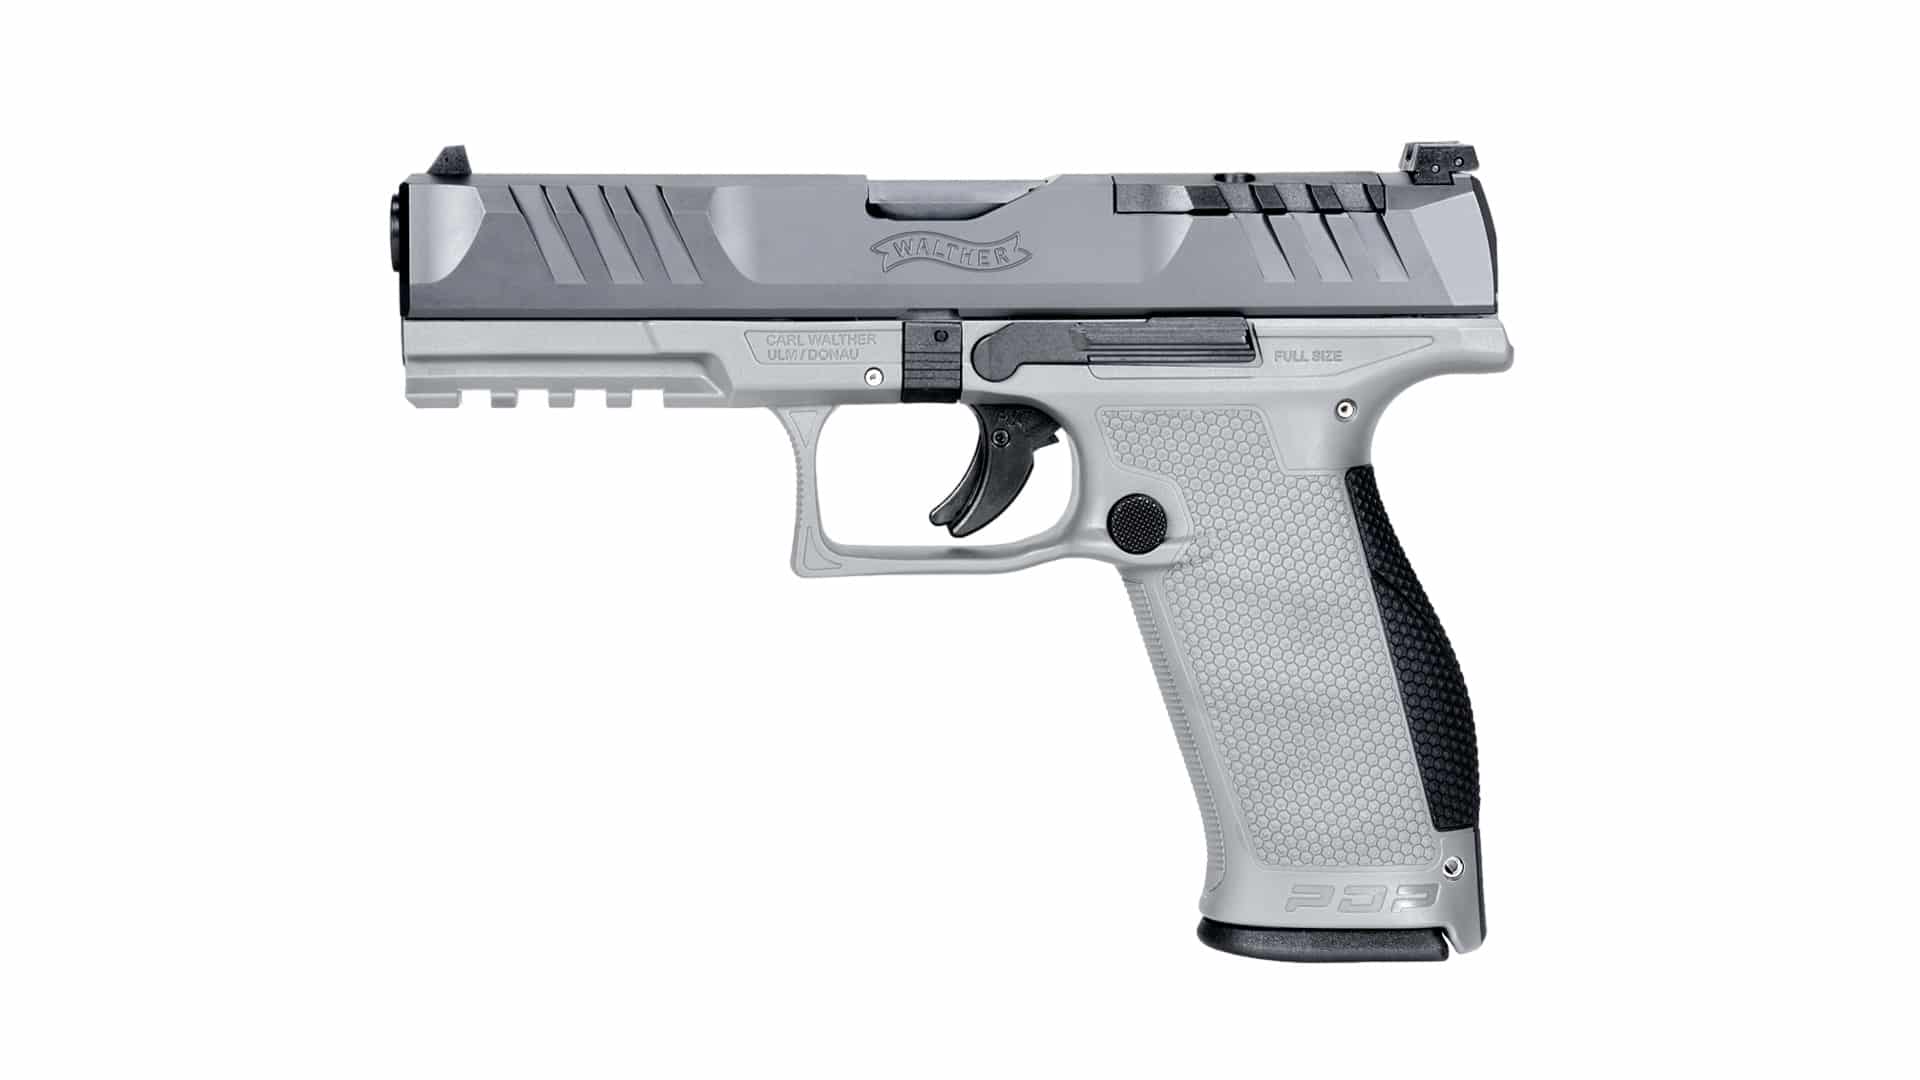 https://cityarsenal.com/product/walther-pdp-full-size-9mm-pistol-18-rounds-gray-2858371/